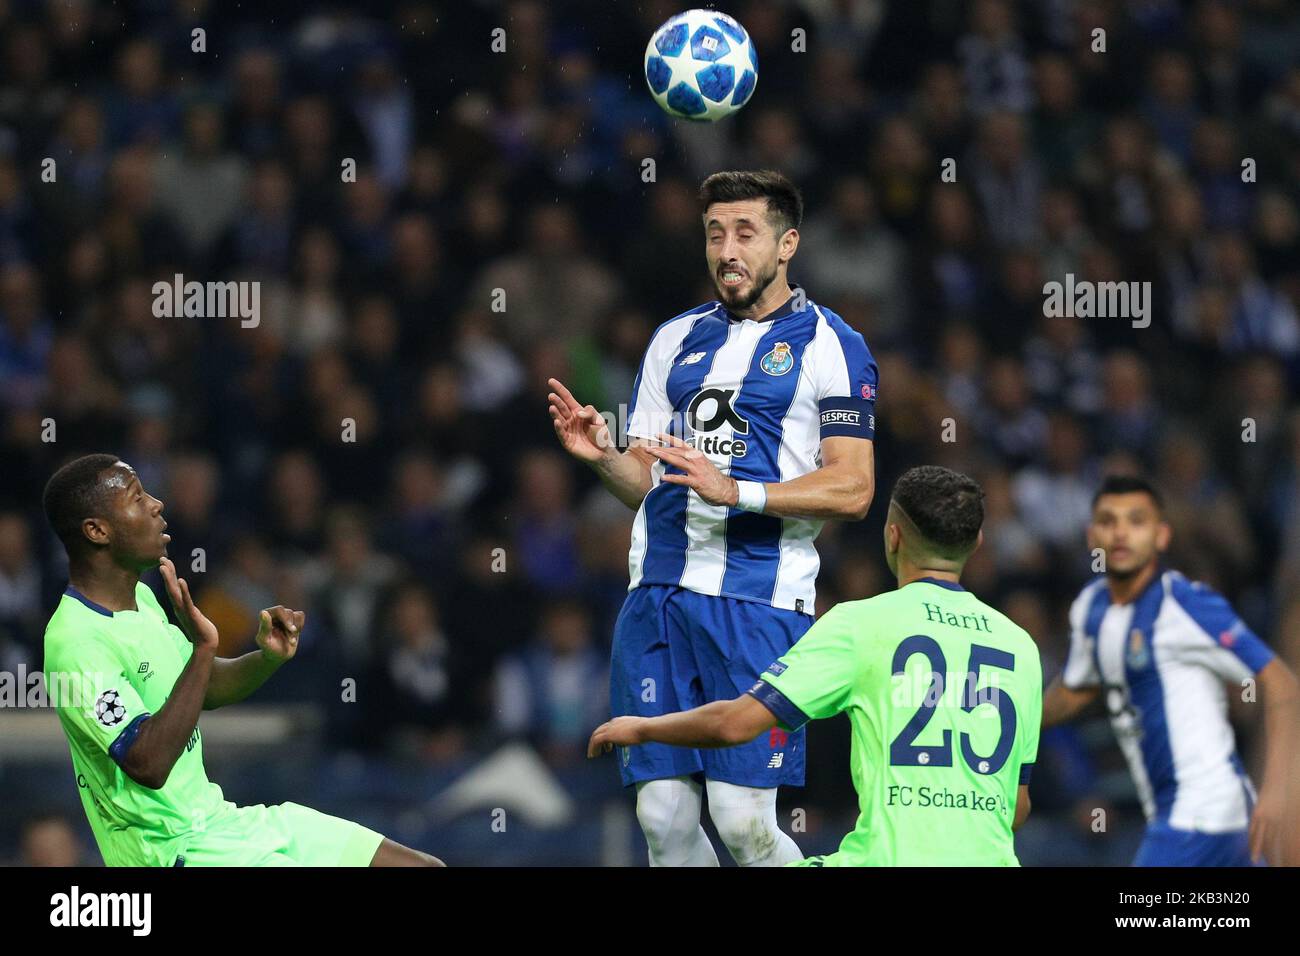 Porto's Mexican midfielder Hector Herrera (C) in action with Amine Harit midfielder of FC Schalke 04 (R) and Hamza Mendyl defender of FC Schalke 04 (L) during the UEFA Champions League, match between FC Porto and FC Schalke 04, at Dragao Stadium in Porto on November 28, 2018 in Porto, Portugal. (Photo by Paulo Oliveira / DPI / NurPhoto) Stock Photo